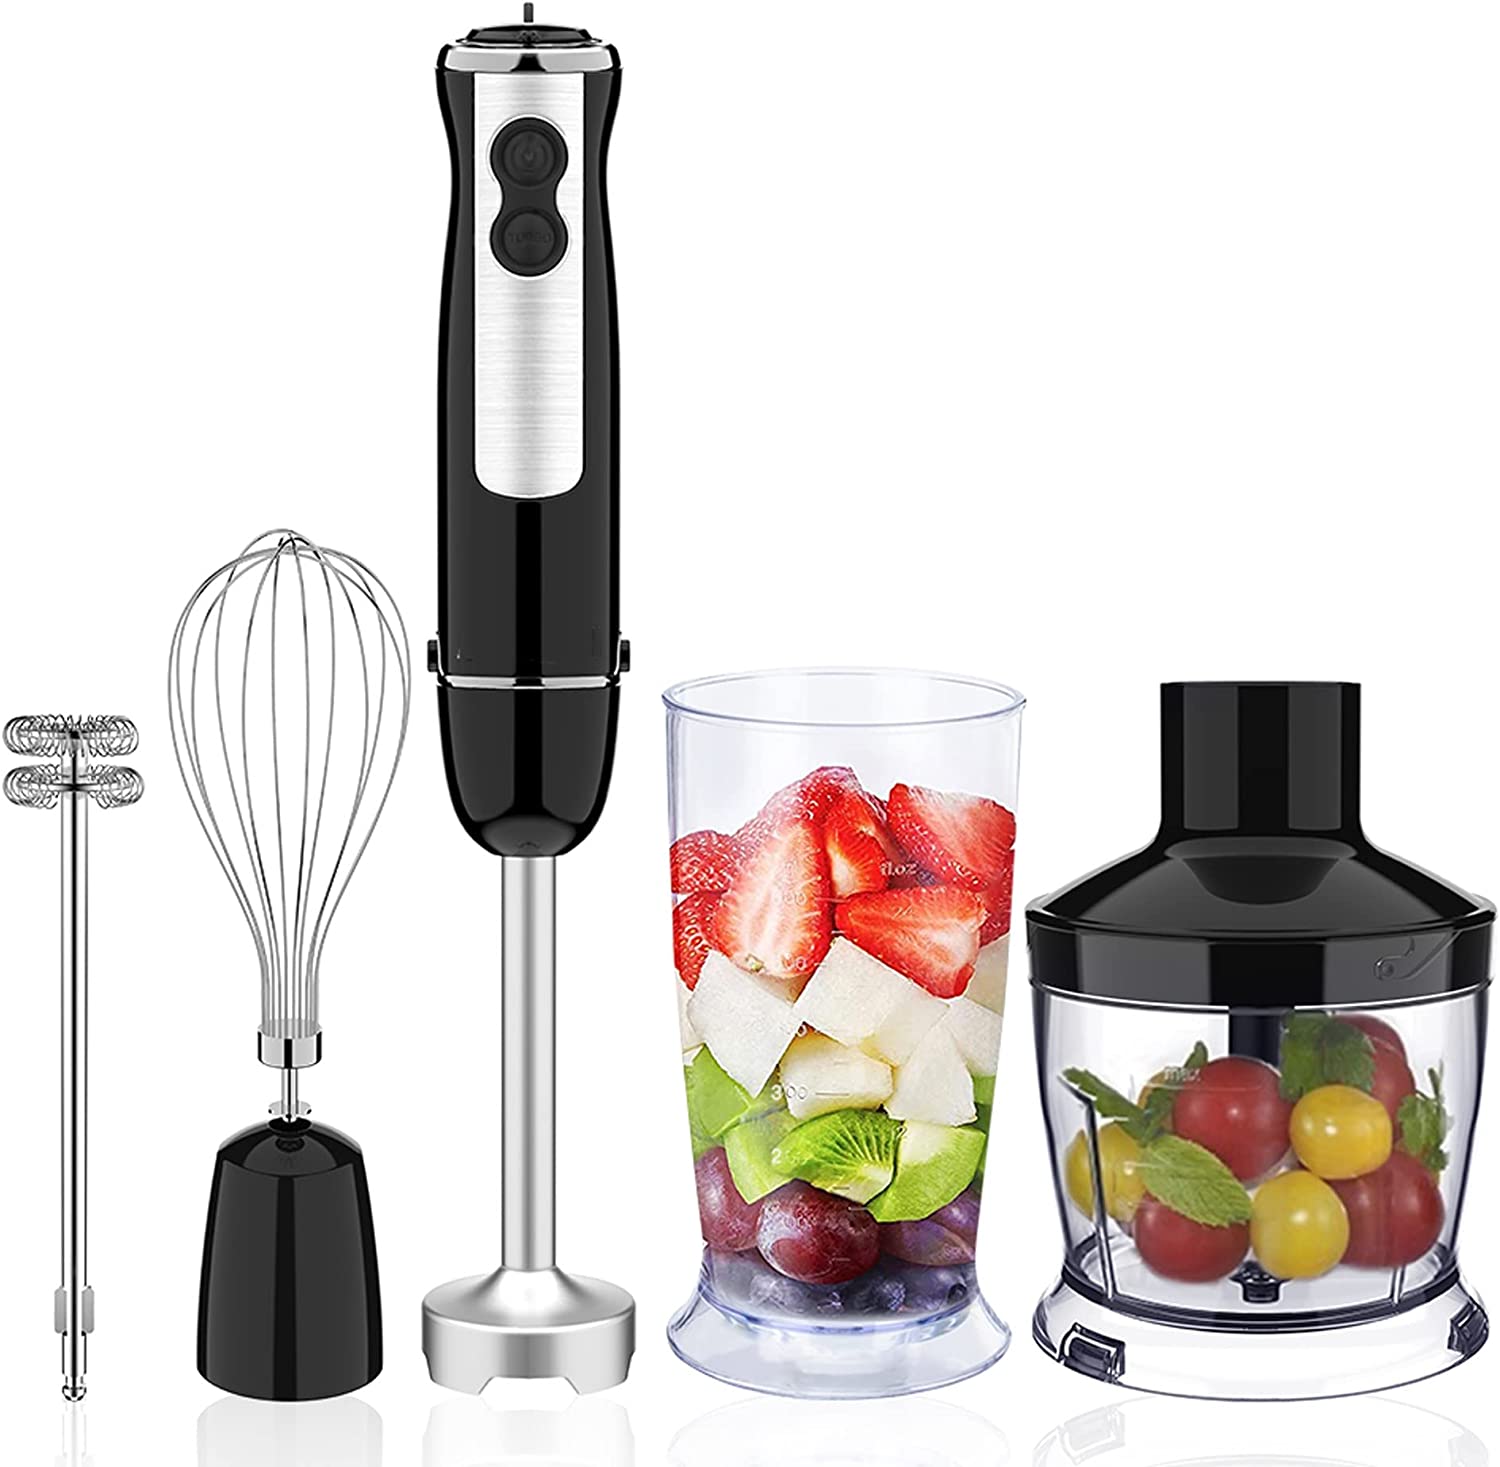 Hand Blender, 400 W Immersion Hand Blender Electric Set 12 Speed 5-in-1 Stainless Steel Hand Blender with Milk Frother, Chopper, Measuring Cup and Whisk, Black